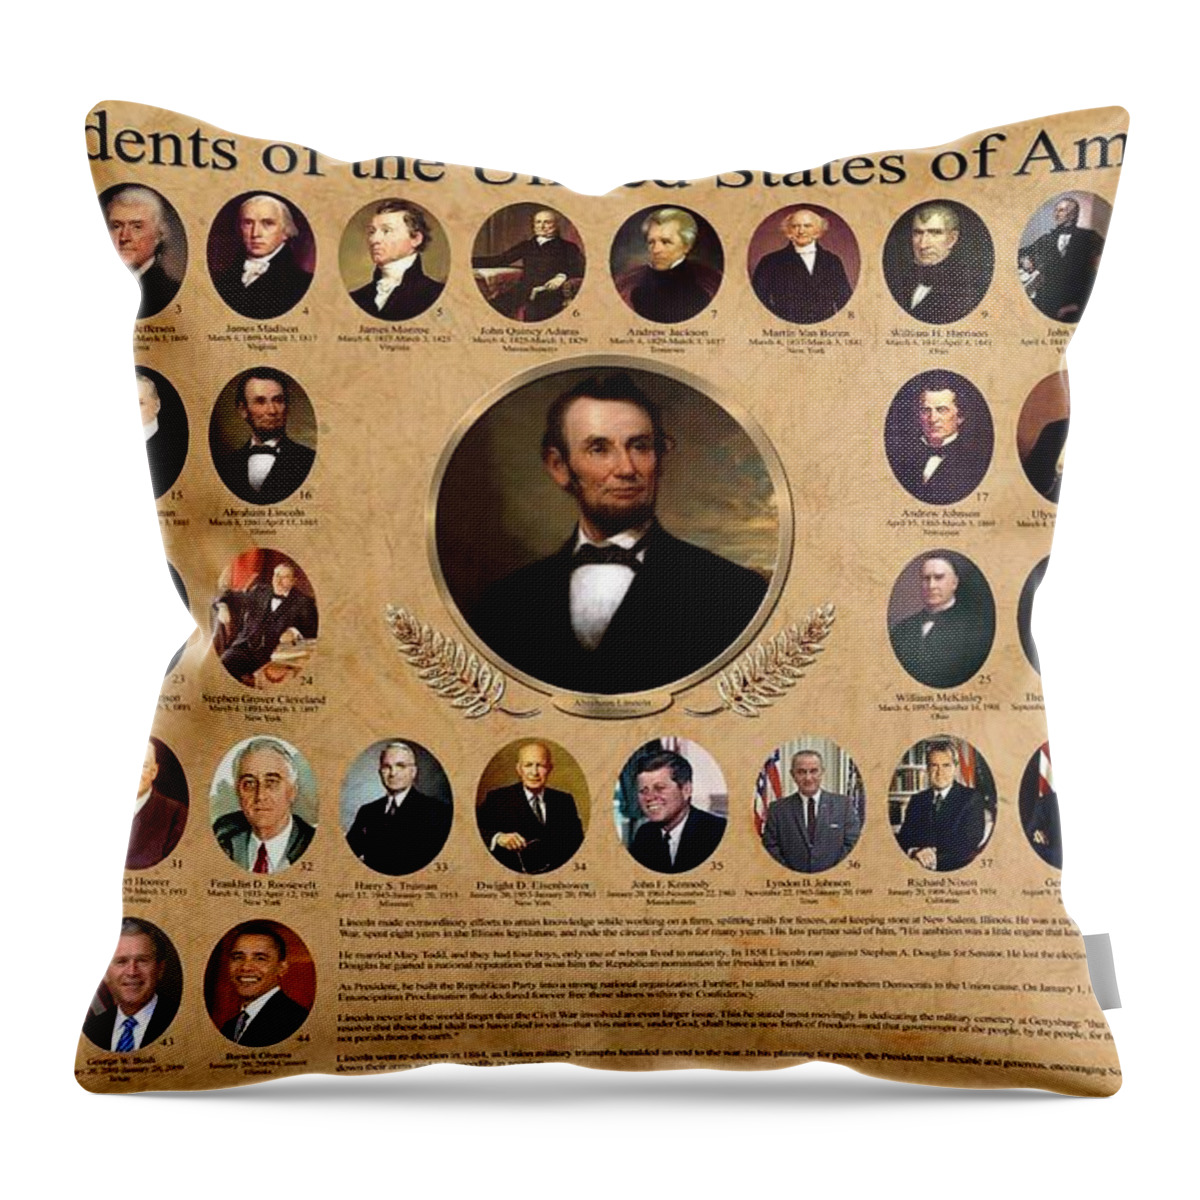 Presidents Of The United States Of America Throw Pillow featuring the digital art Presidents of the United States of America by Georgia Clare